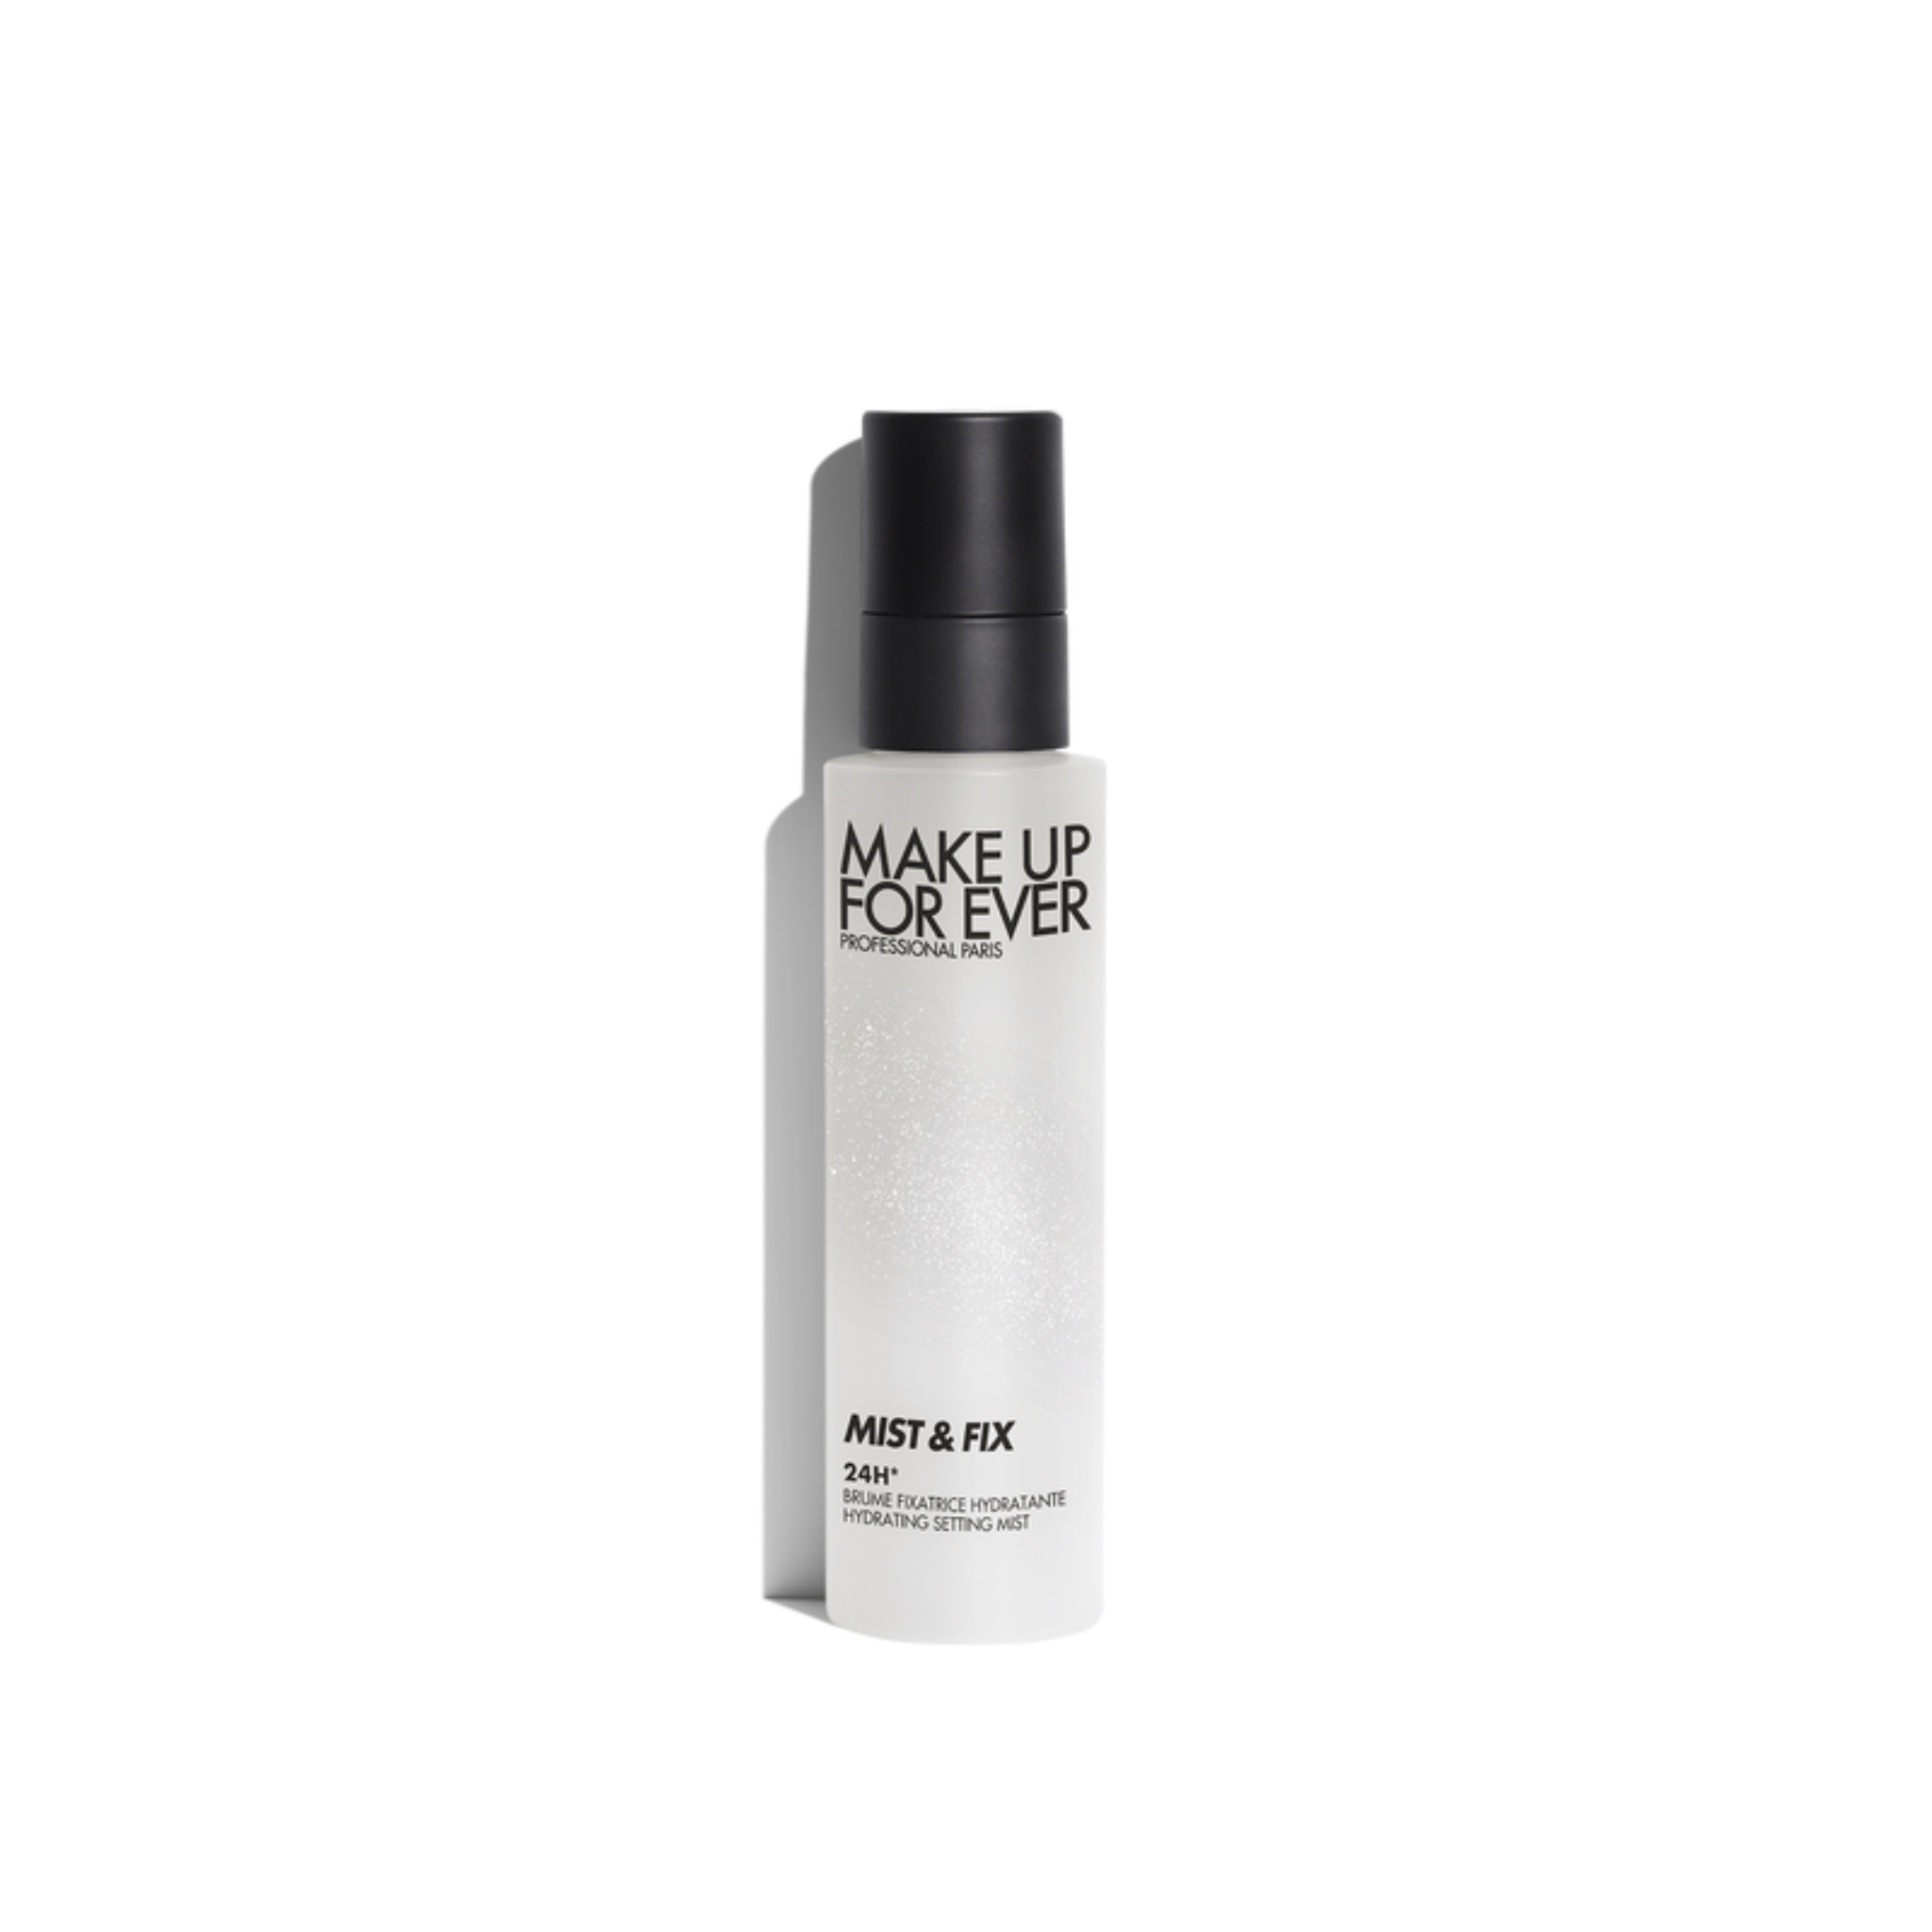 NEW - Make Up For Ever - Mist & Fix 24h Hydrating Setting Spray